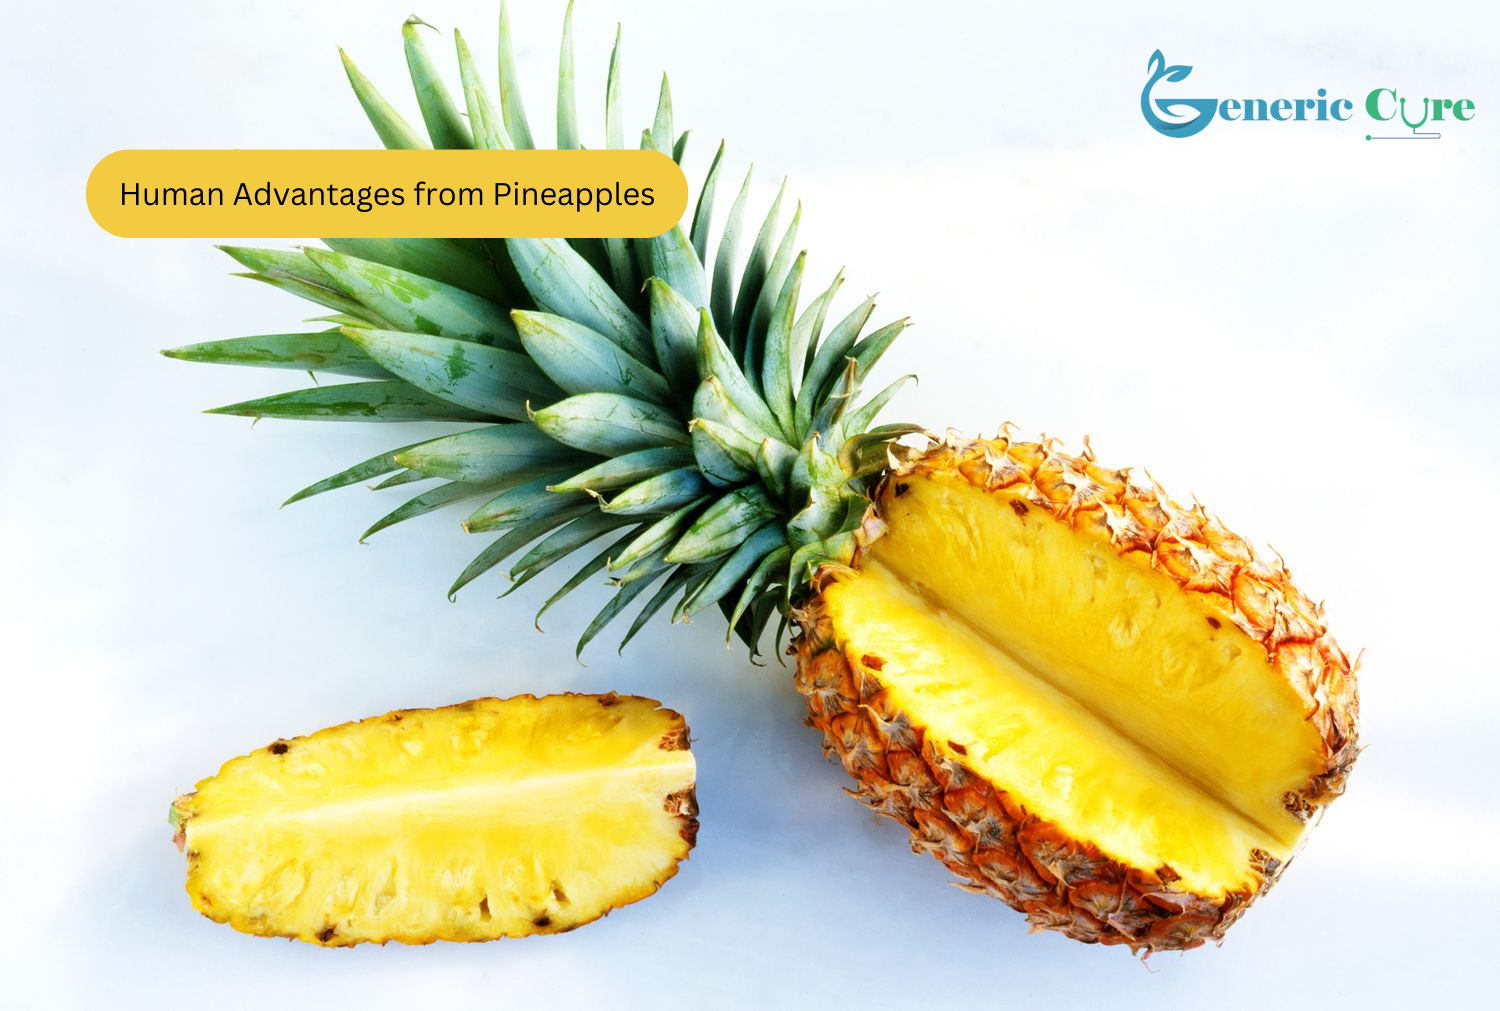 Human Advantages from Pineapples